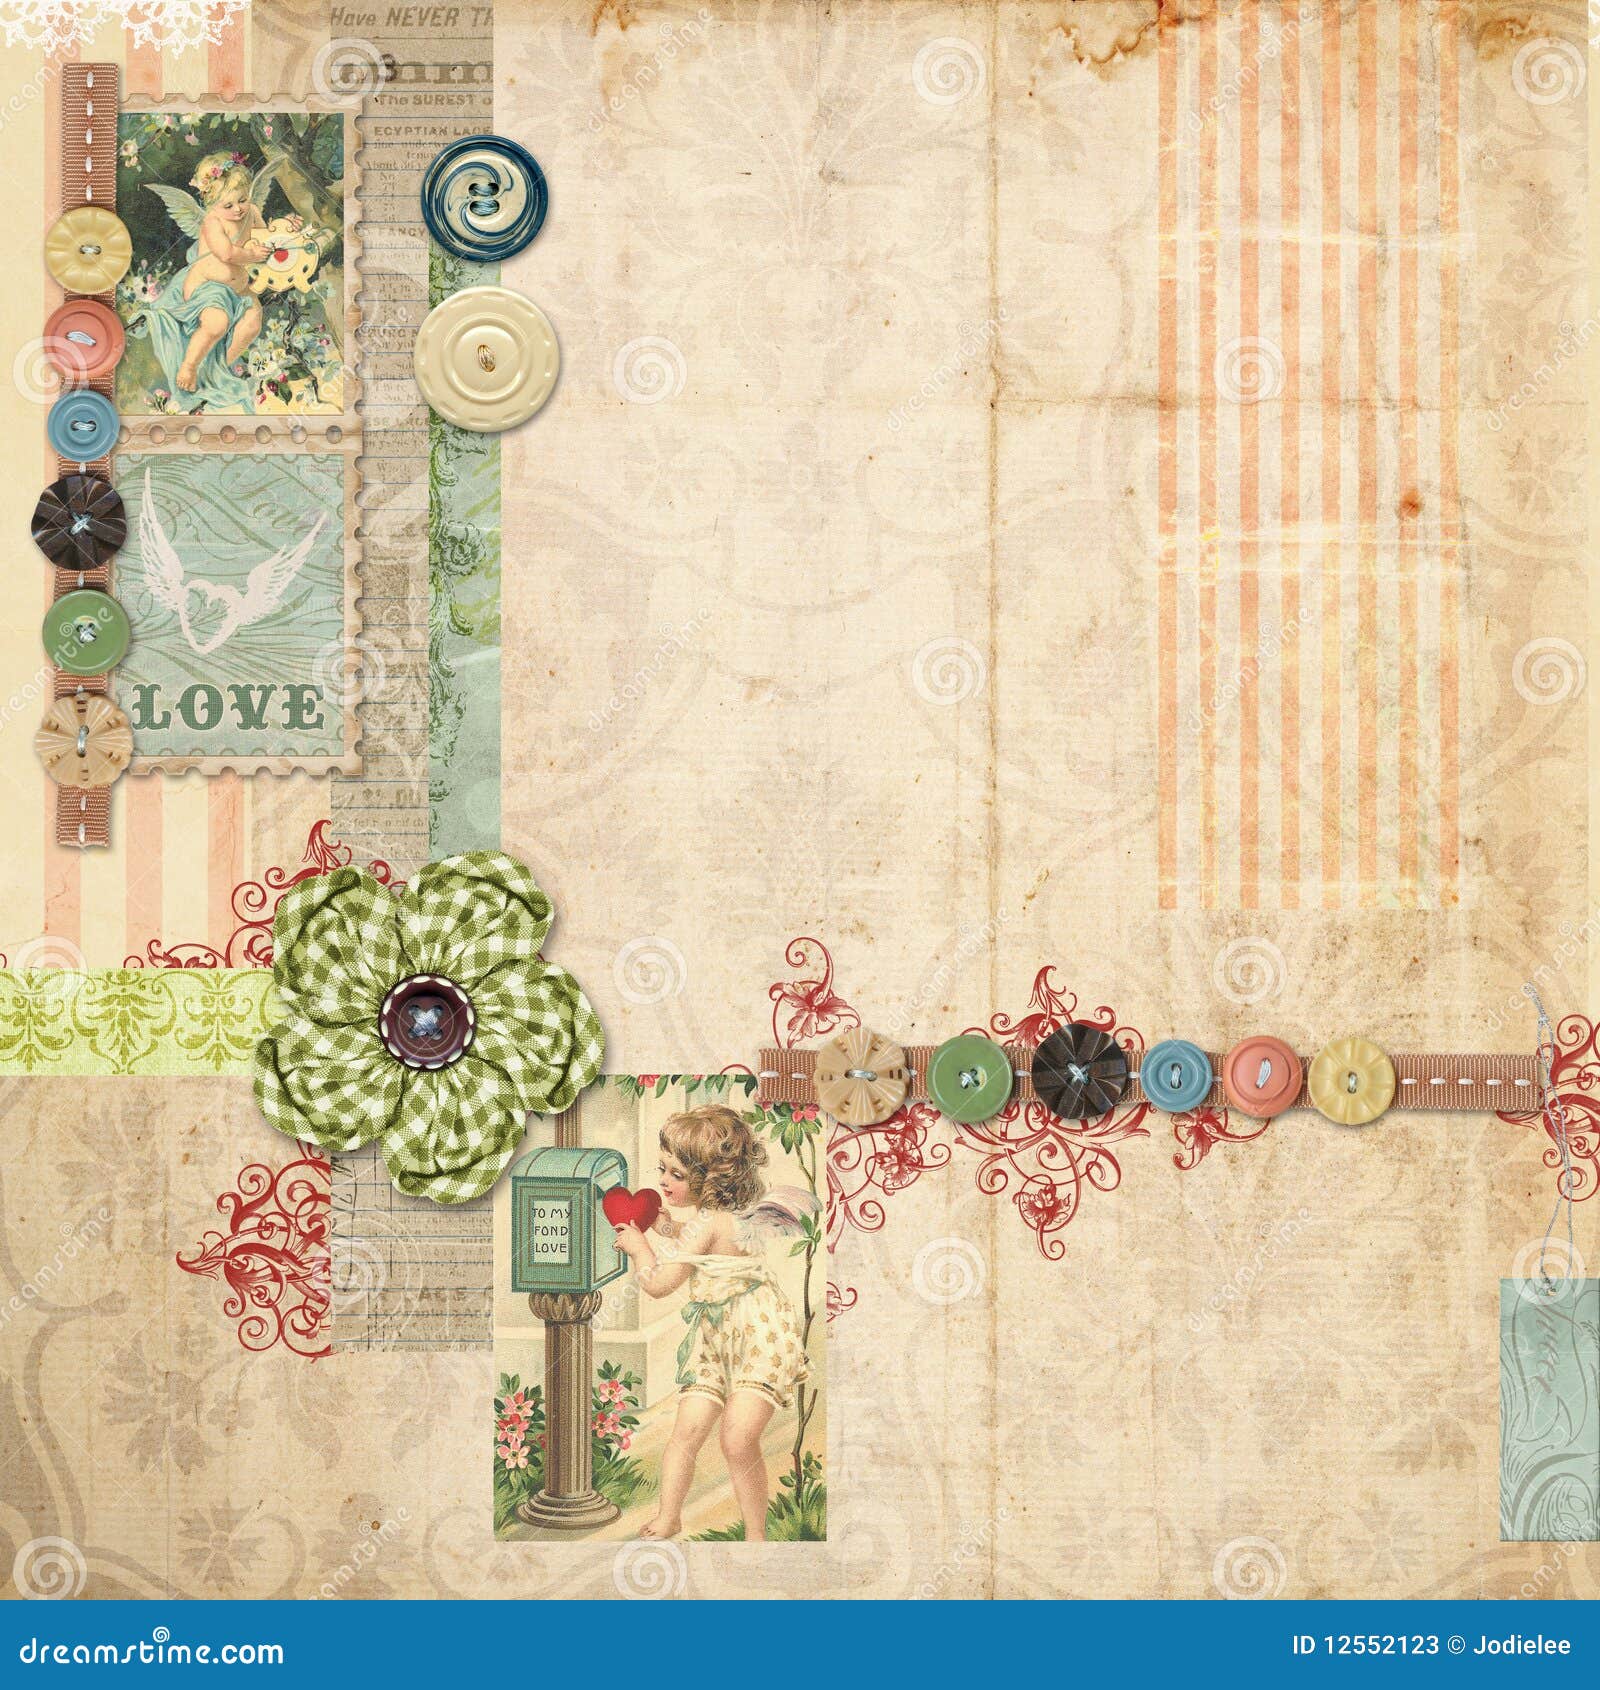 Vintage Scrapbook Style Antique Themed Graphic by